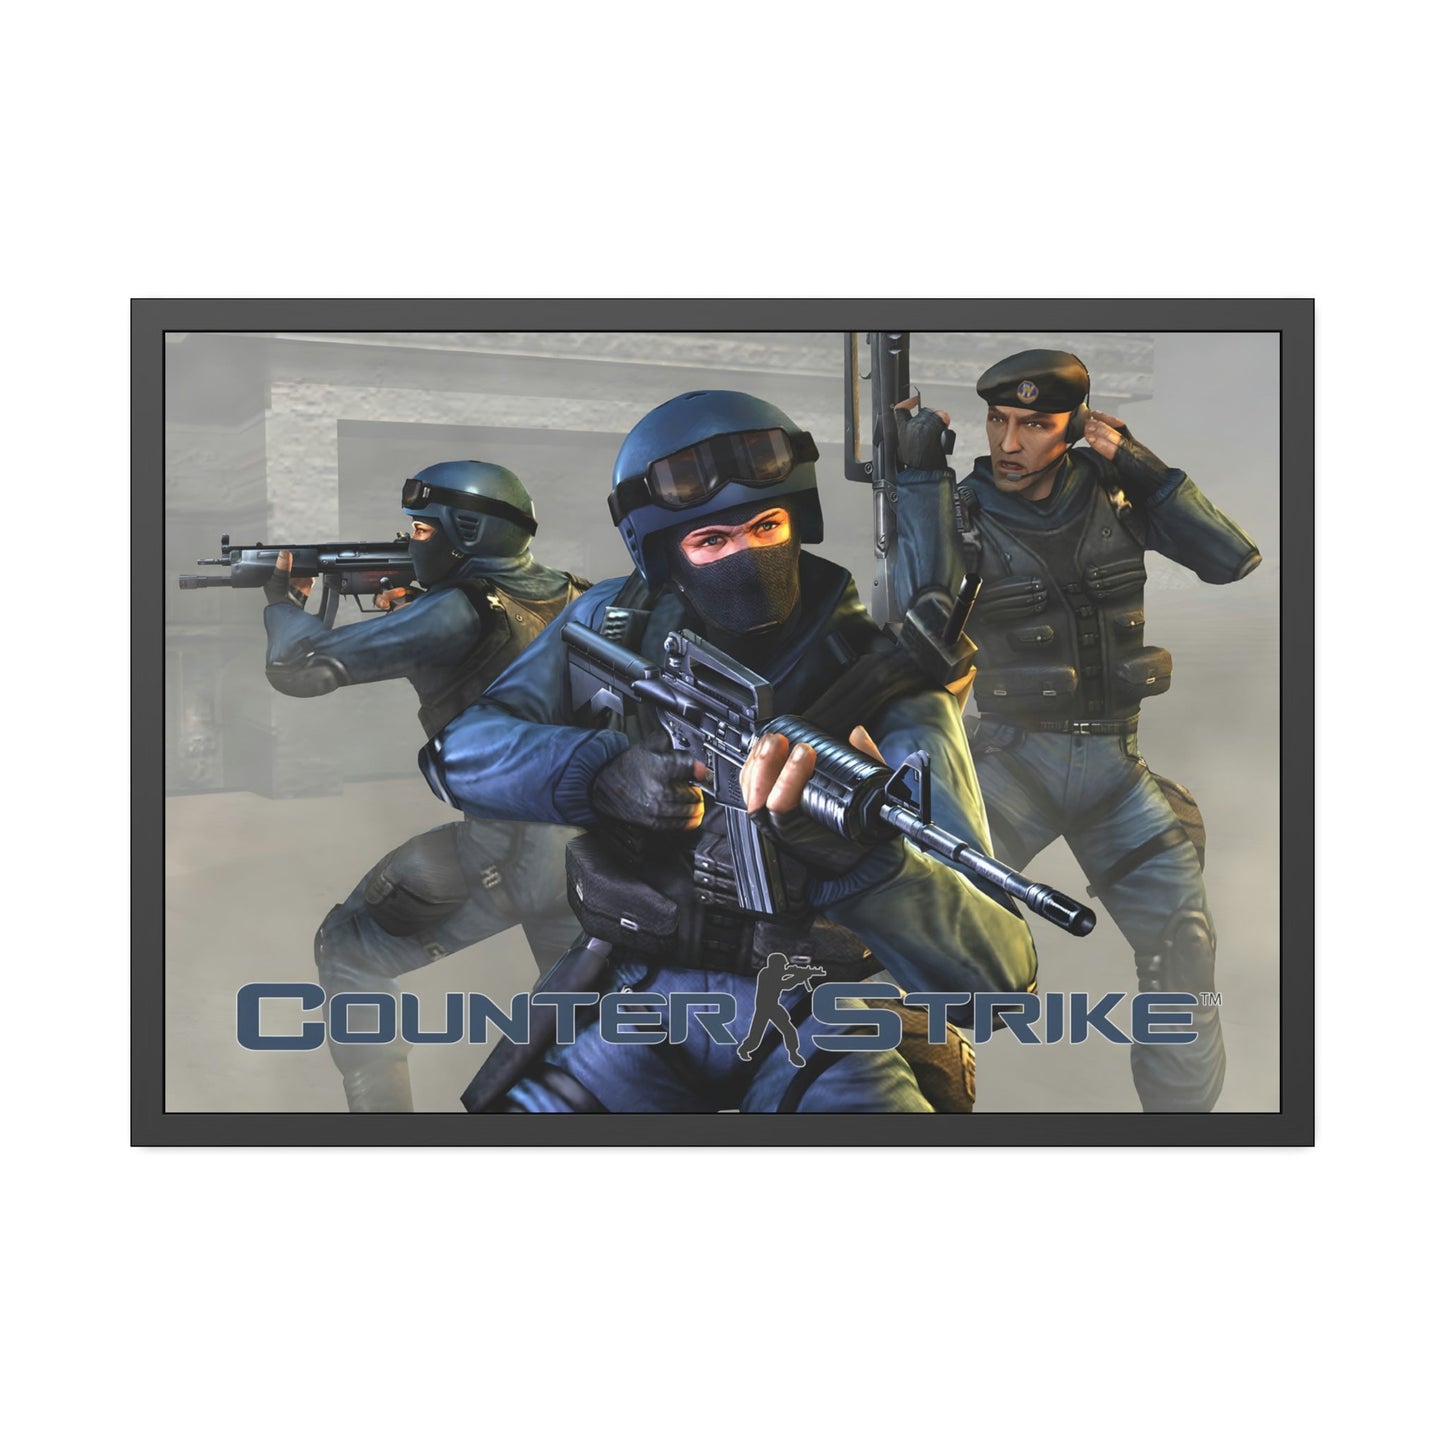 Game On: Iconic Counter Strike Poster as Framed Wall Art